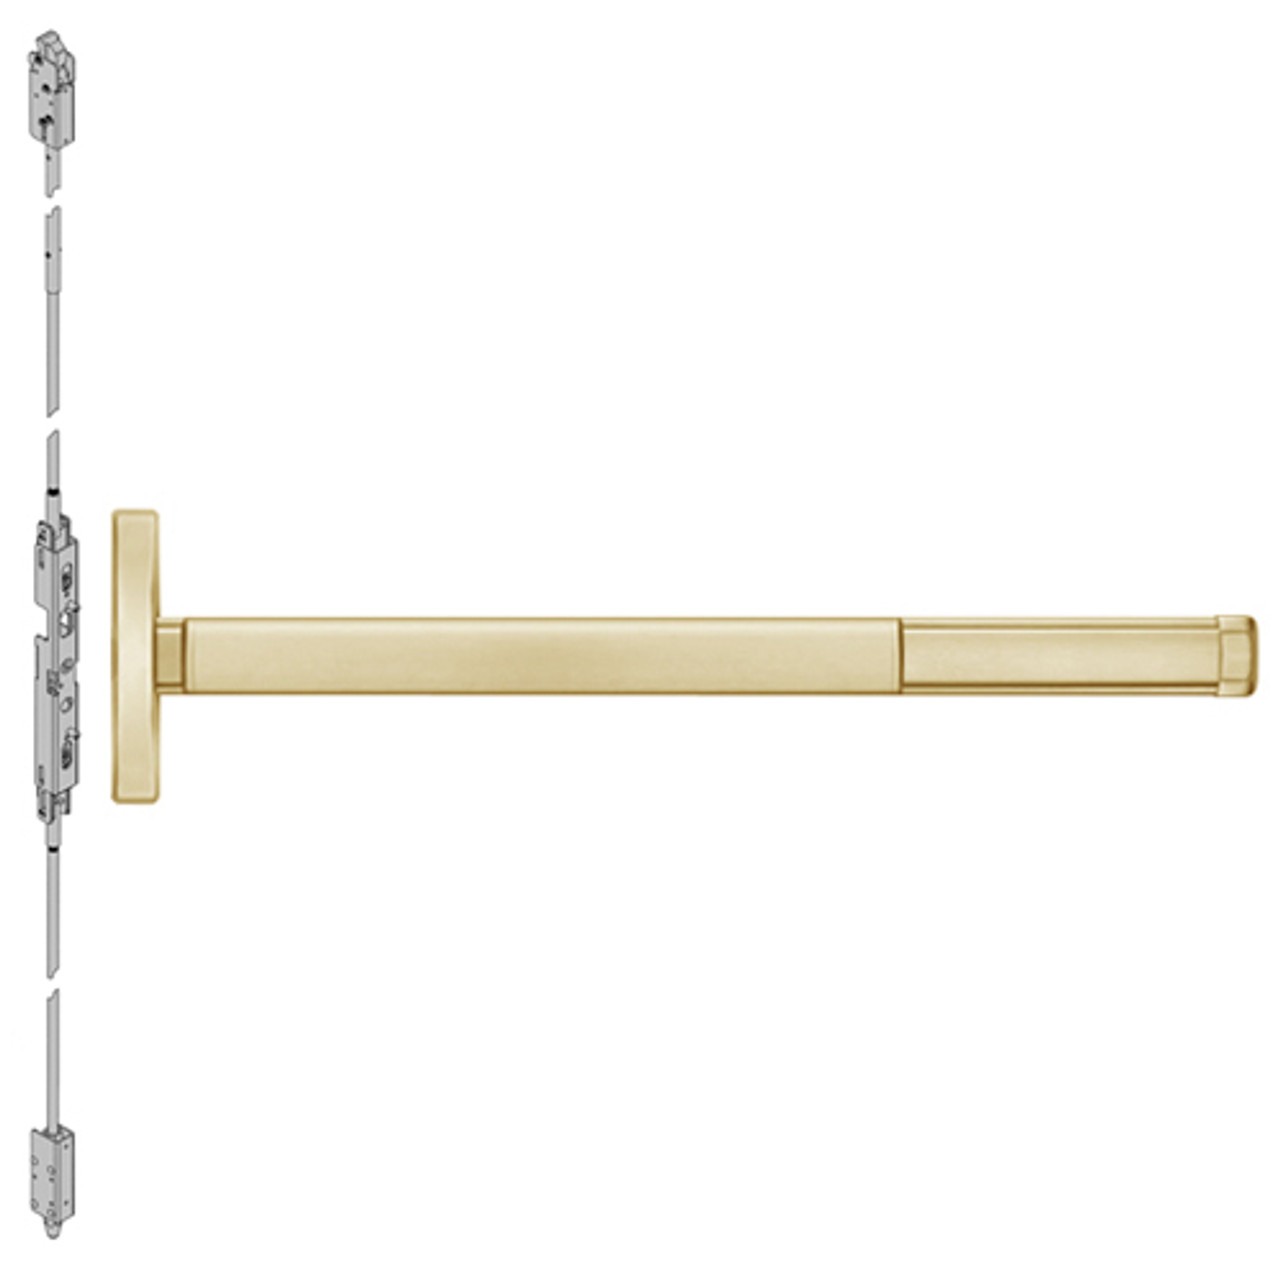 DEFL2602-606-36 PHI 2600 Series Fire Rated Concealed Vertical Rod Exit Device with Delayed Egress Prepped for Dummy Trim in Satin Brass Finish